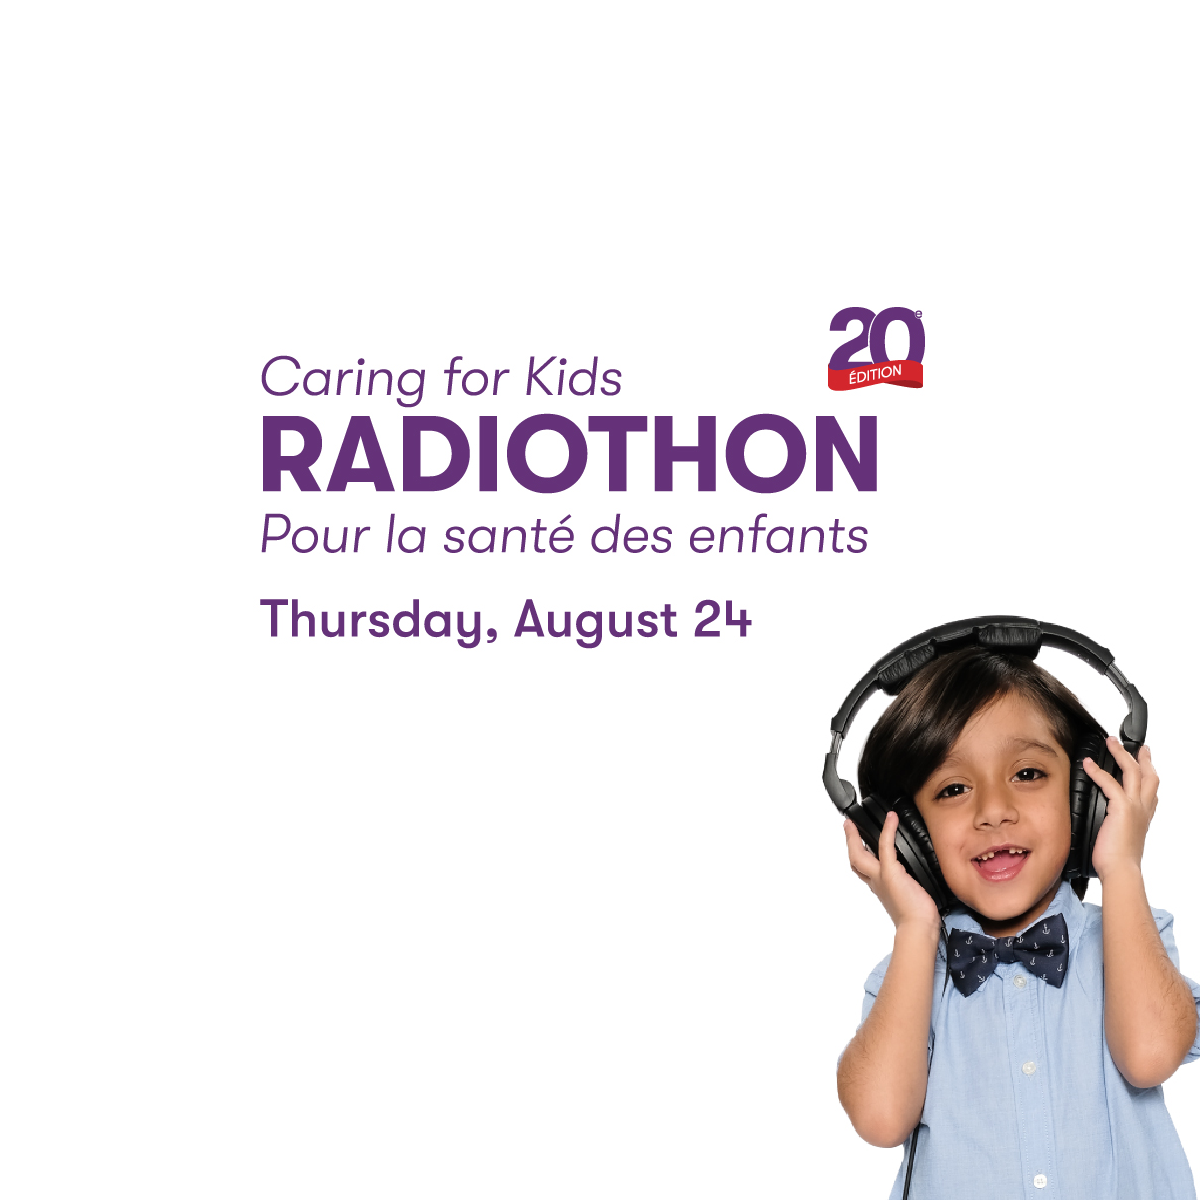 Caring for Kids Radiothon: 11 year old Kyaa Guinto was struck by a car and was in “critical but stable condition” at the Montreal Children’s Hospital